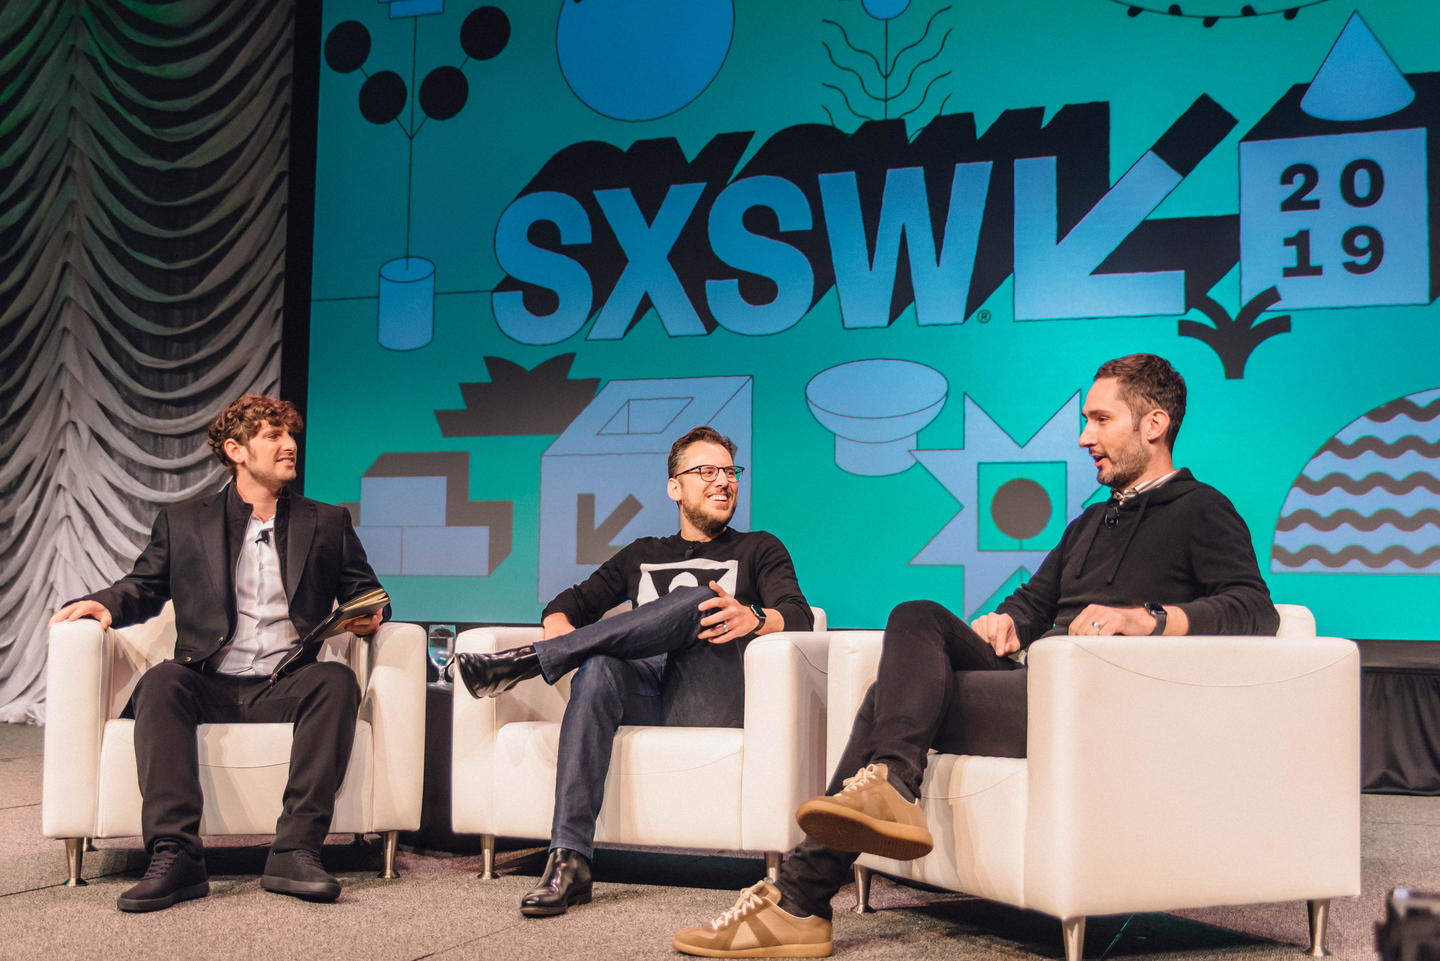 Instagram founders Kevin Systrom and Mike Crieger with Josh Constine.